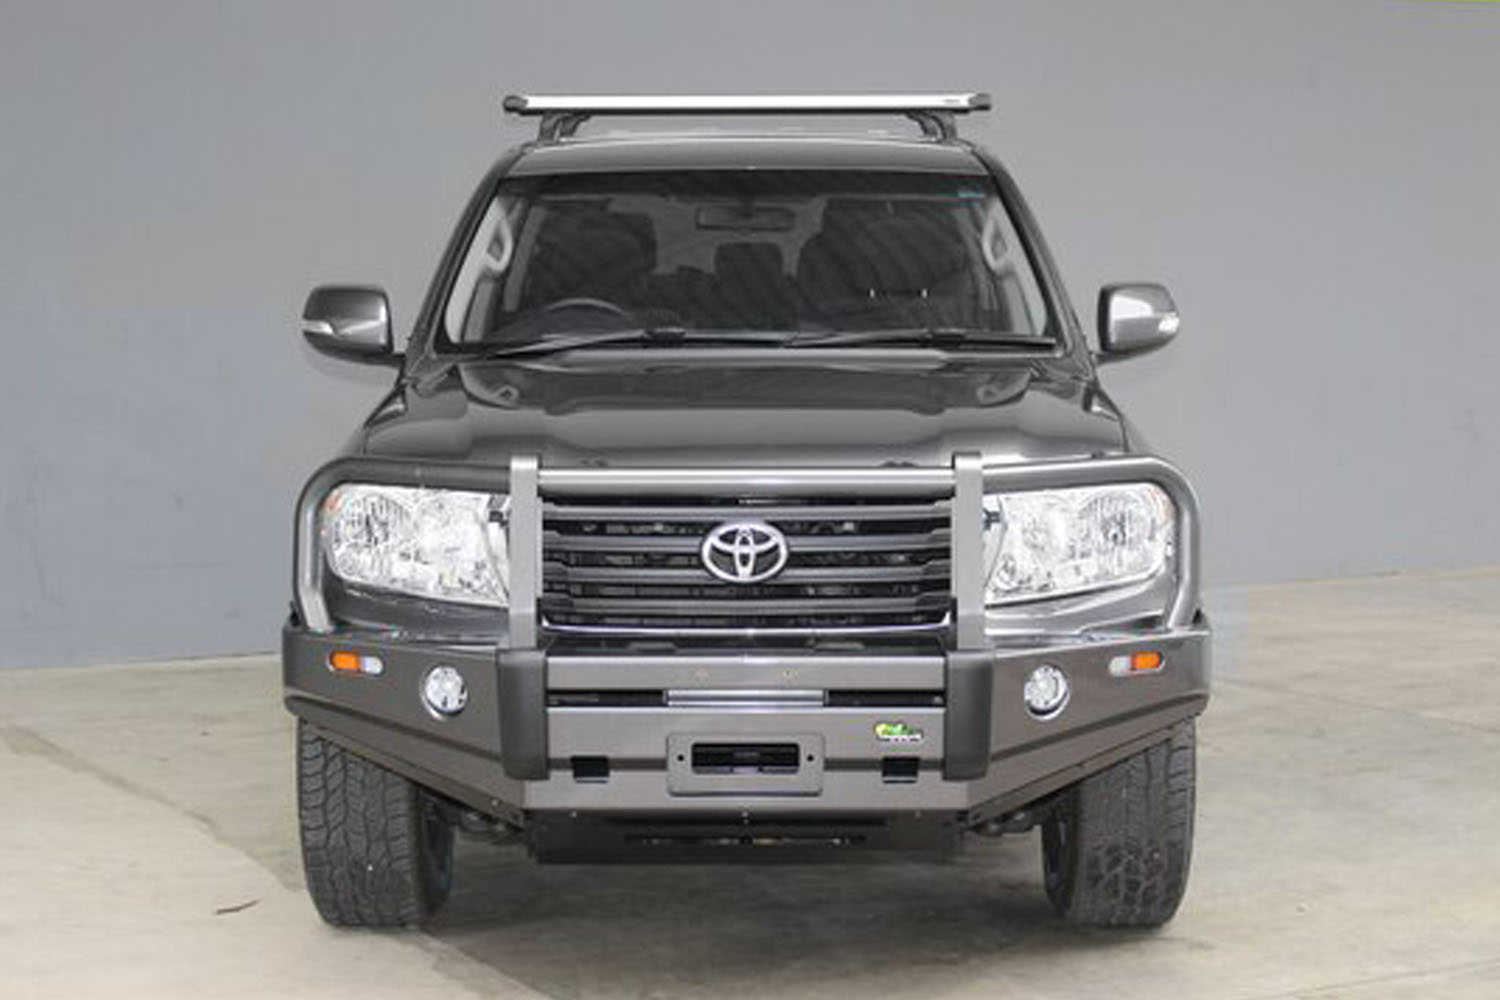 What is the difference between the classic and the premium front bumpers?